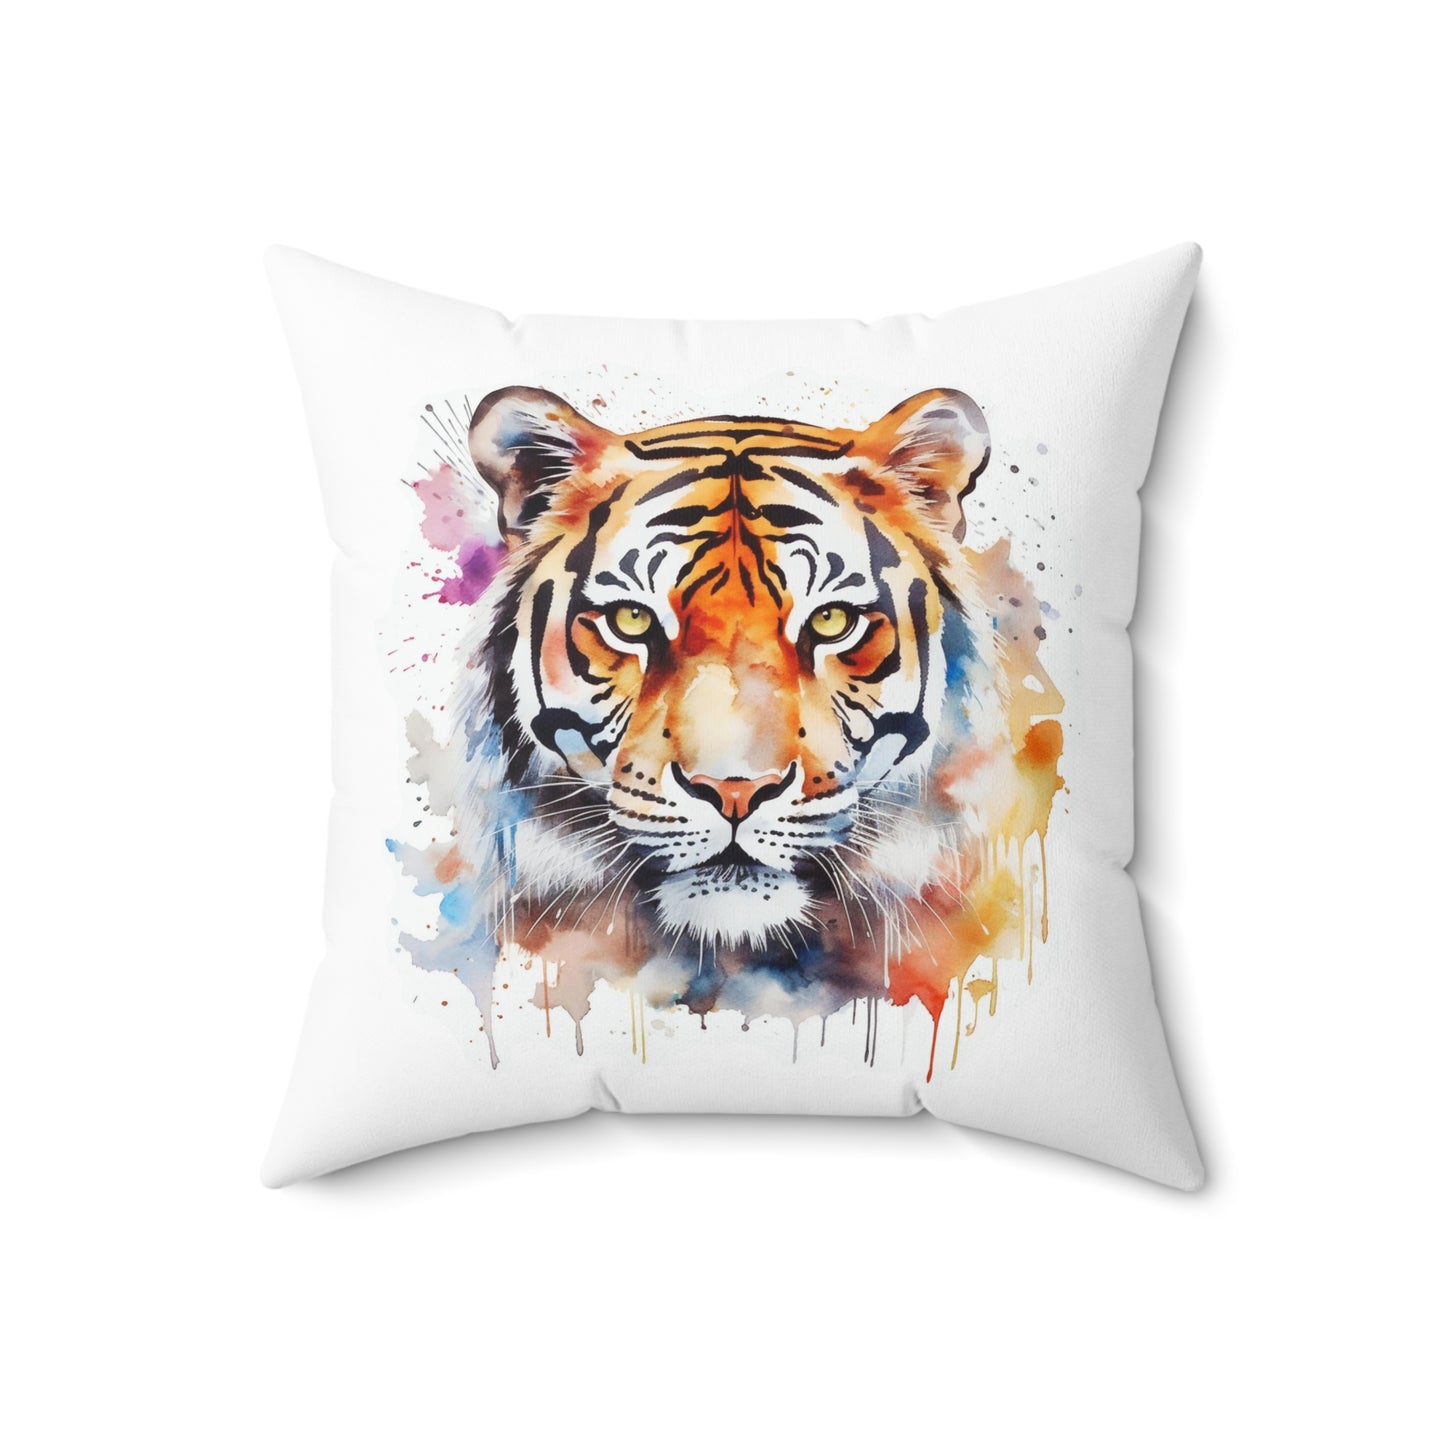 Tiger Throw Pillow, Watercolor Tiger Decorative Pillow, Square Animal Cushion, Double Sided Accent Pillow, Concealed Zipper